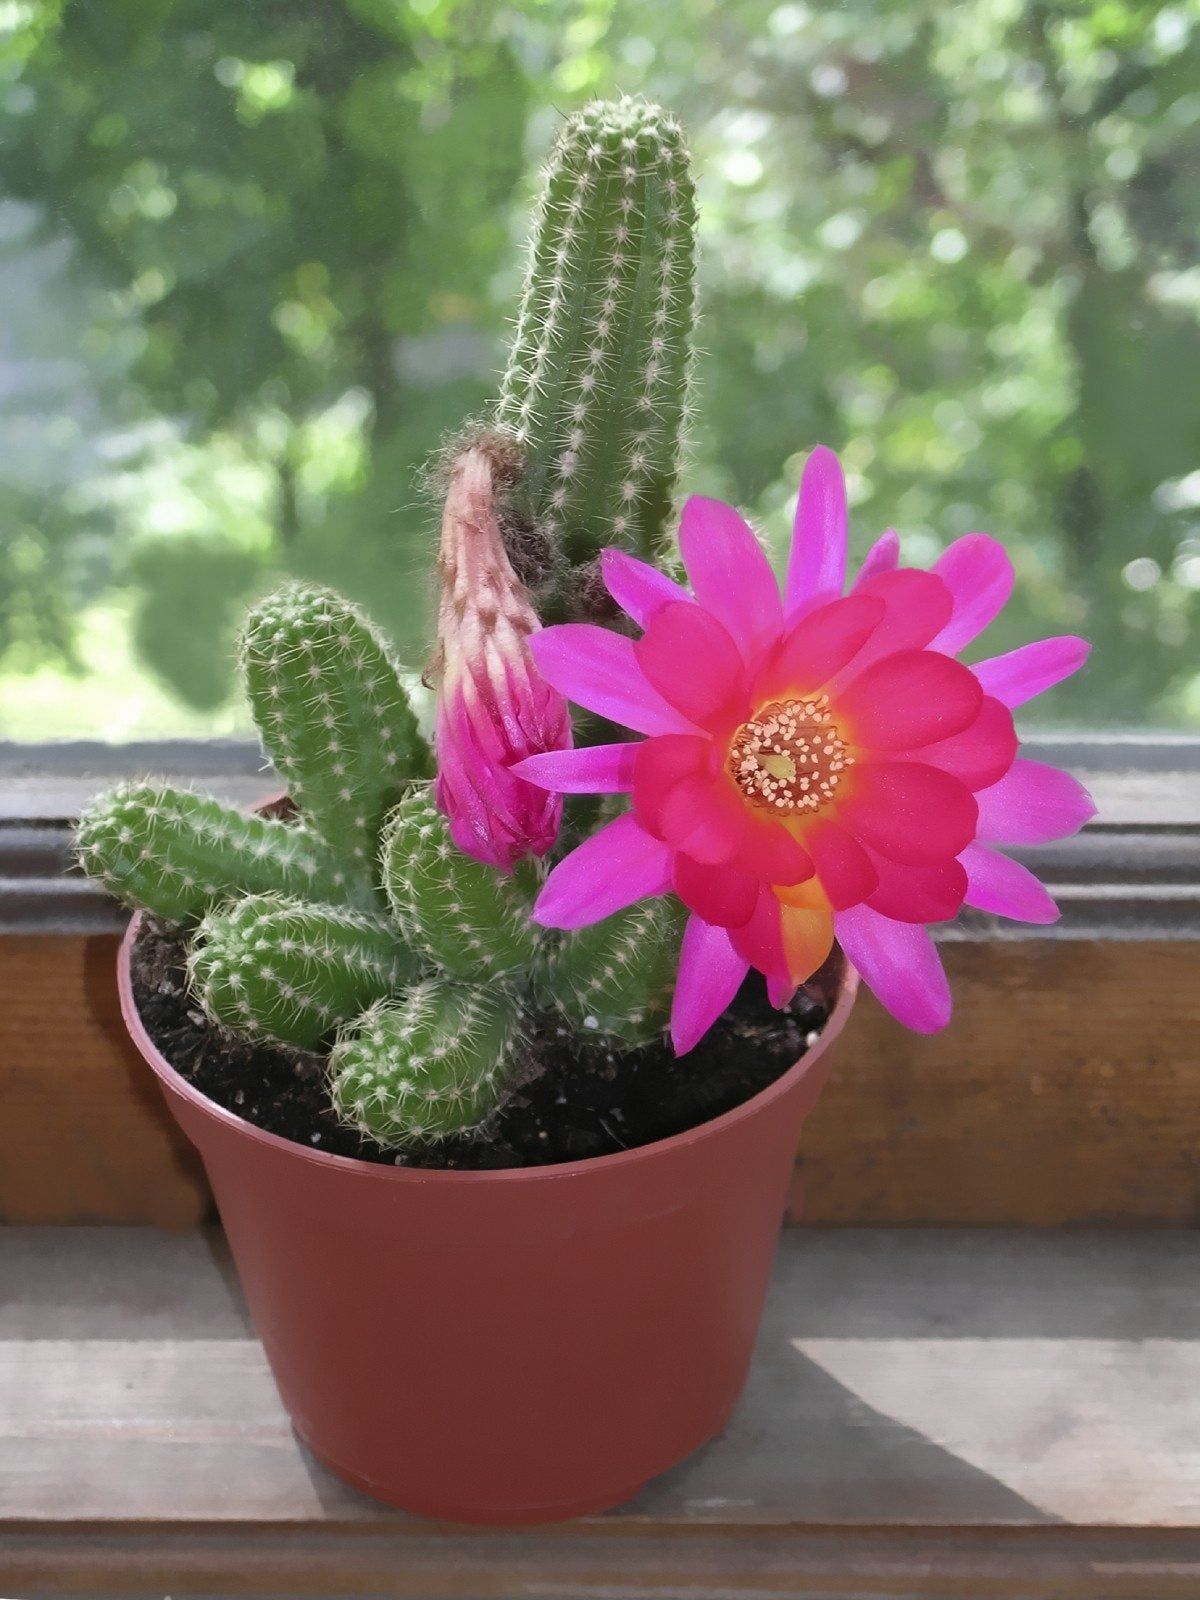 Does A Cactus Need Fertilizer - How And When To Feed Cactus Plants